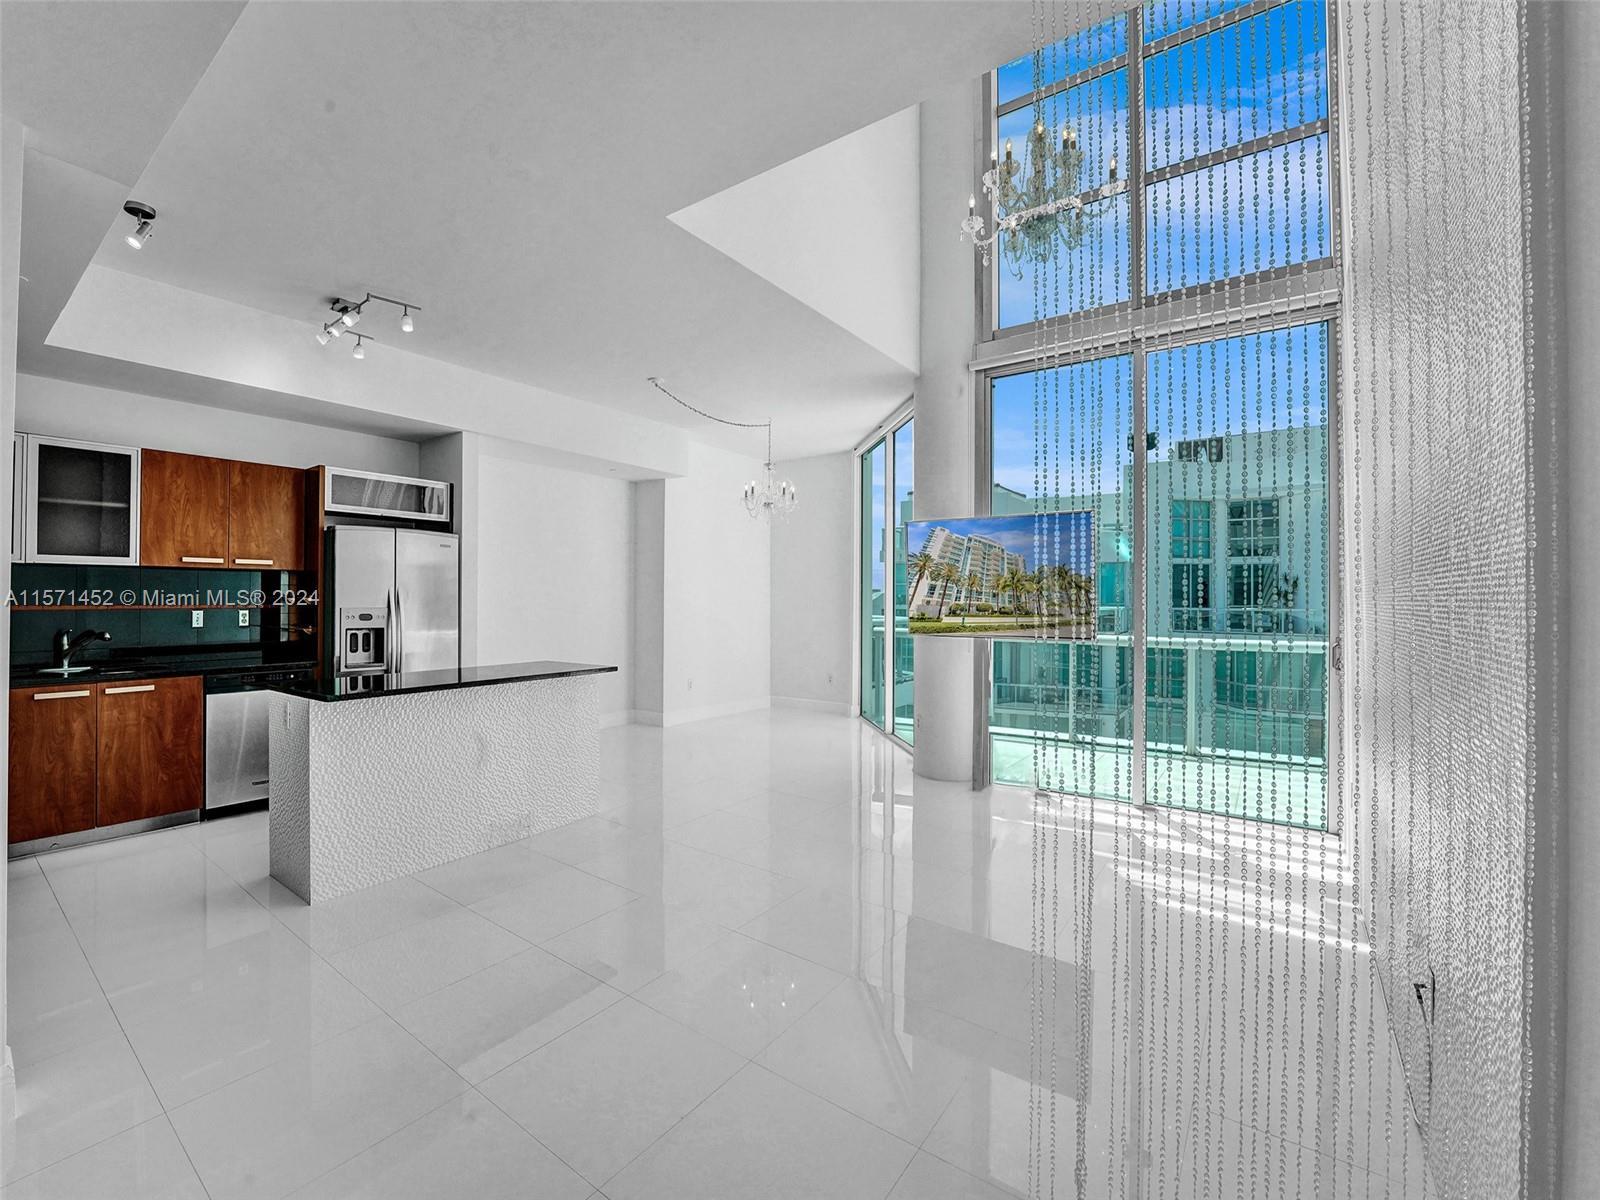 Experience luxury living in this stunning two-story penthouse in the heart of Aventura inside "The A